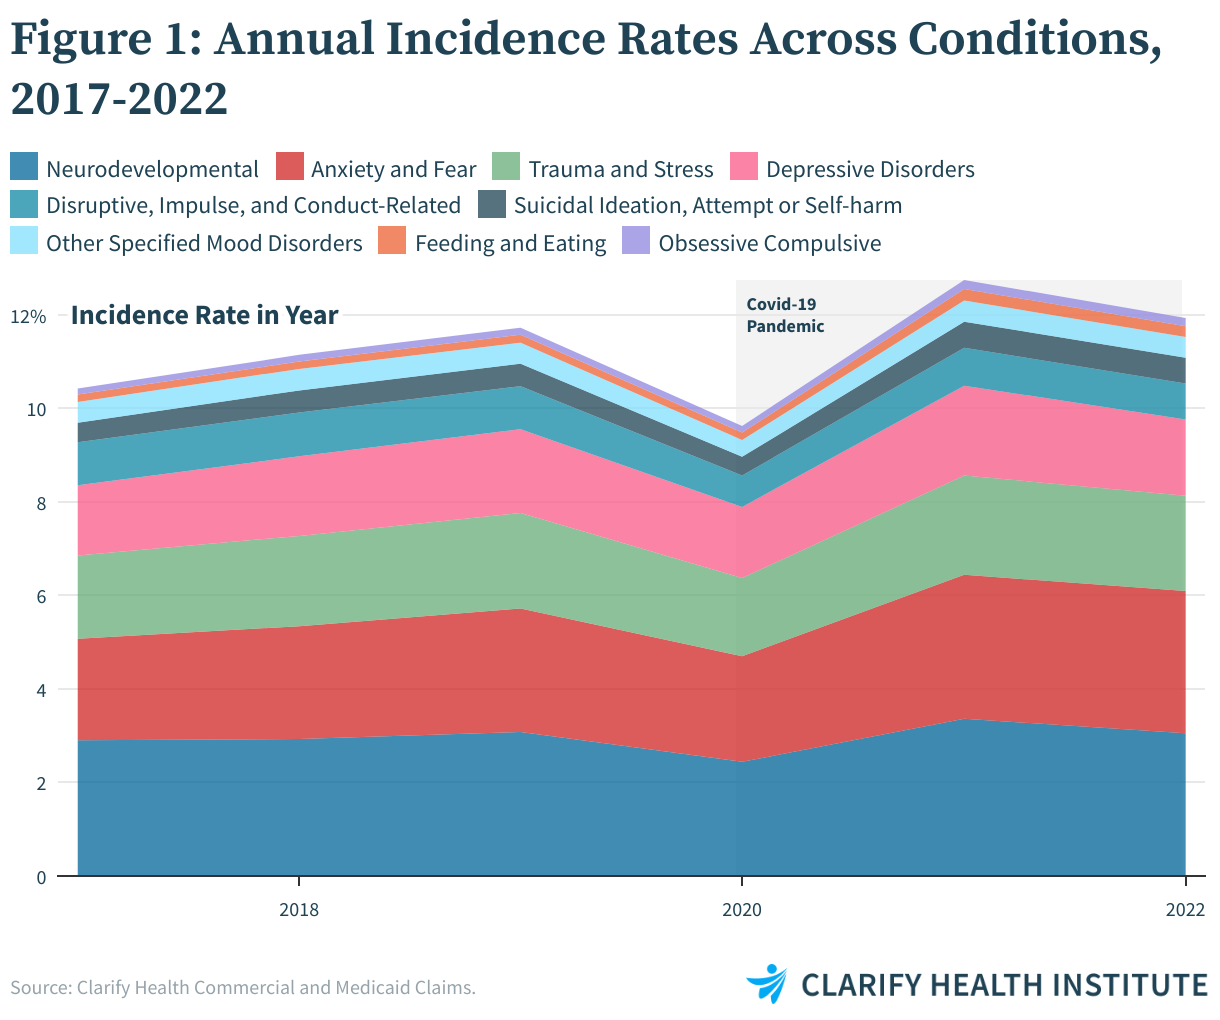 FIGURE 1: ANNUAL INCIDENCE RATES ACROSS CONDITIONS, 2017-2022